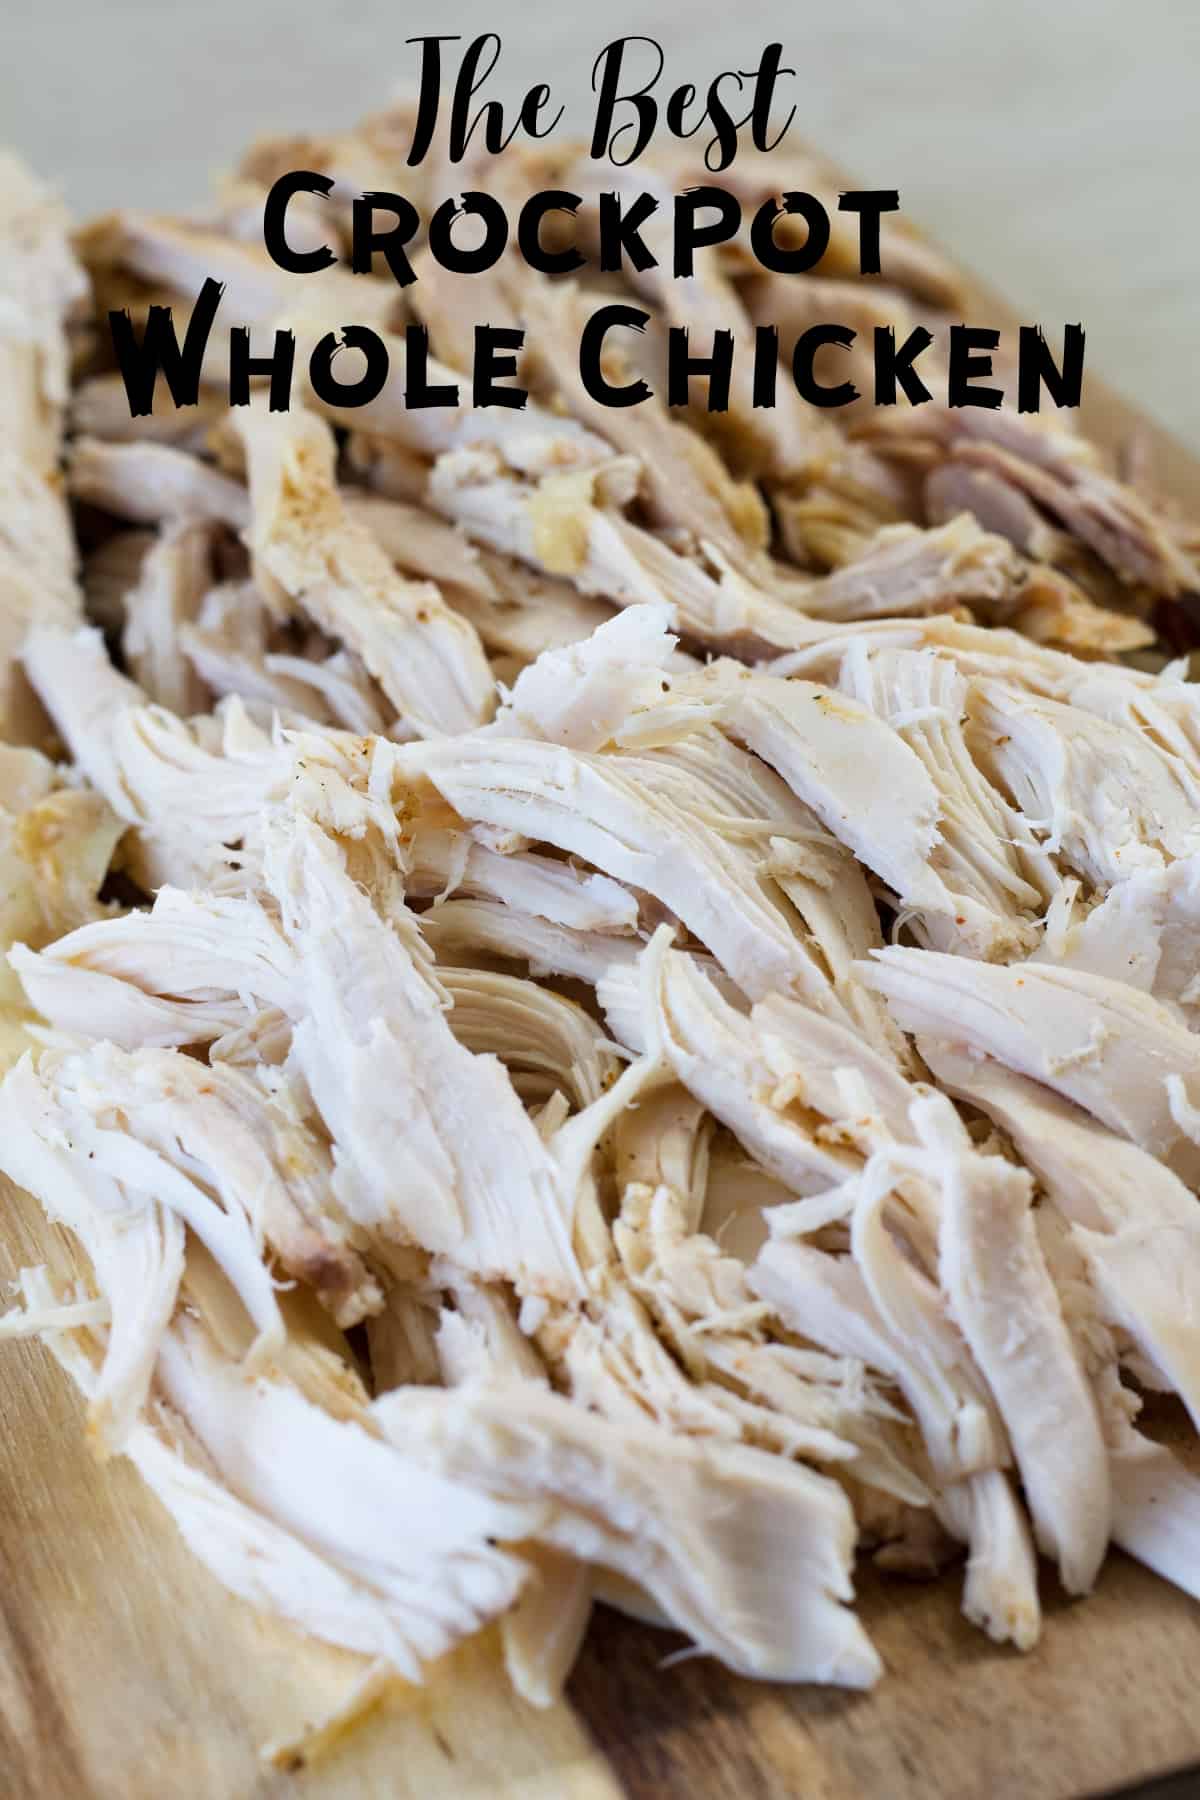 The Best Crockpot Whole Chicken - a rotisserie style chicken perfect for a quick dinner and to use in recipes that call for cooked chicken.  via @mindyscookingobsession